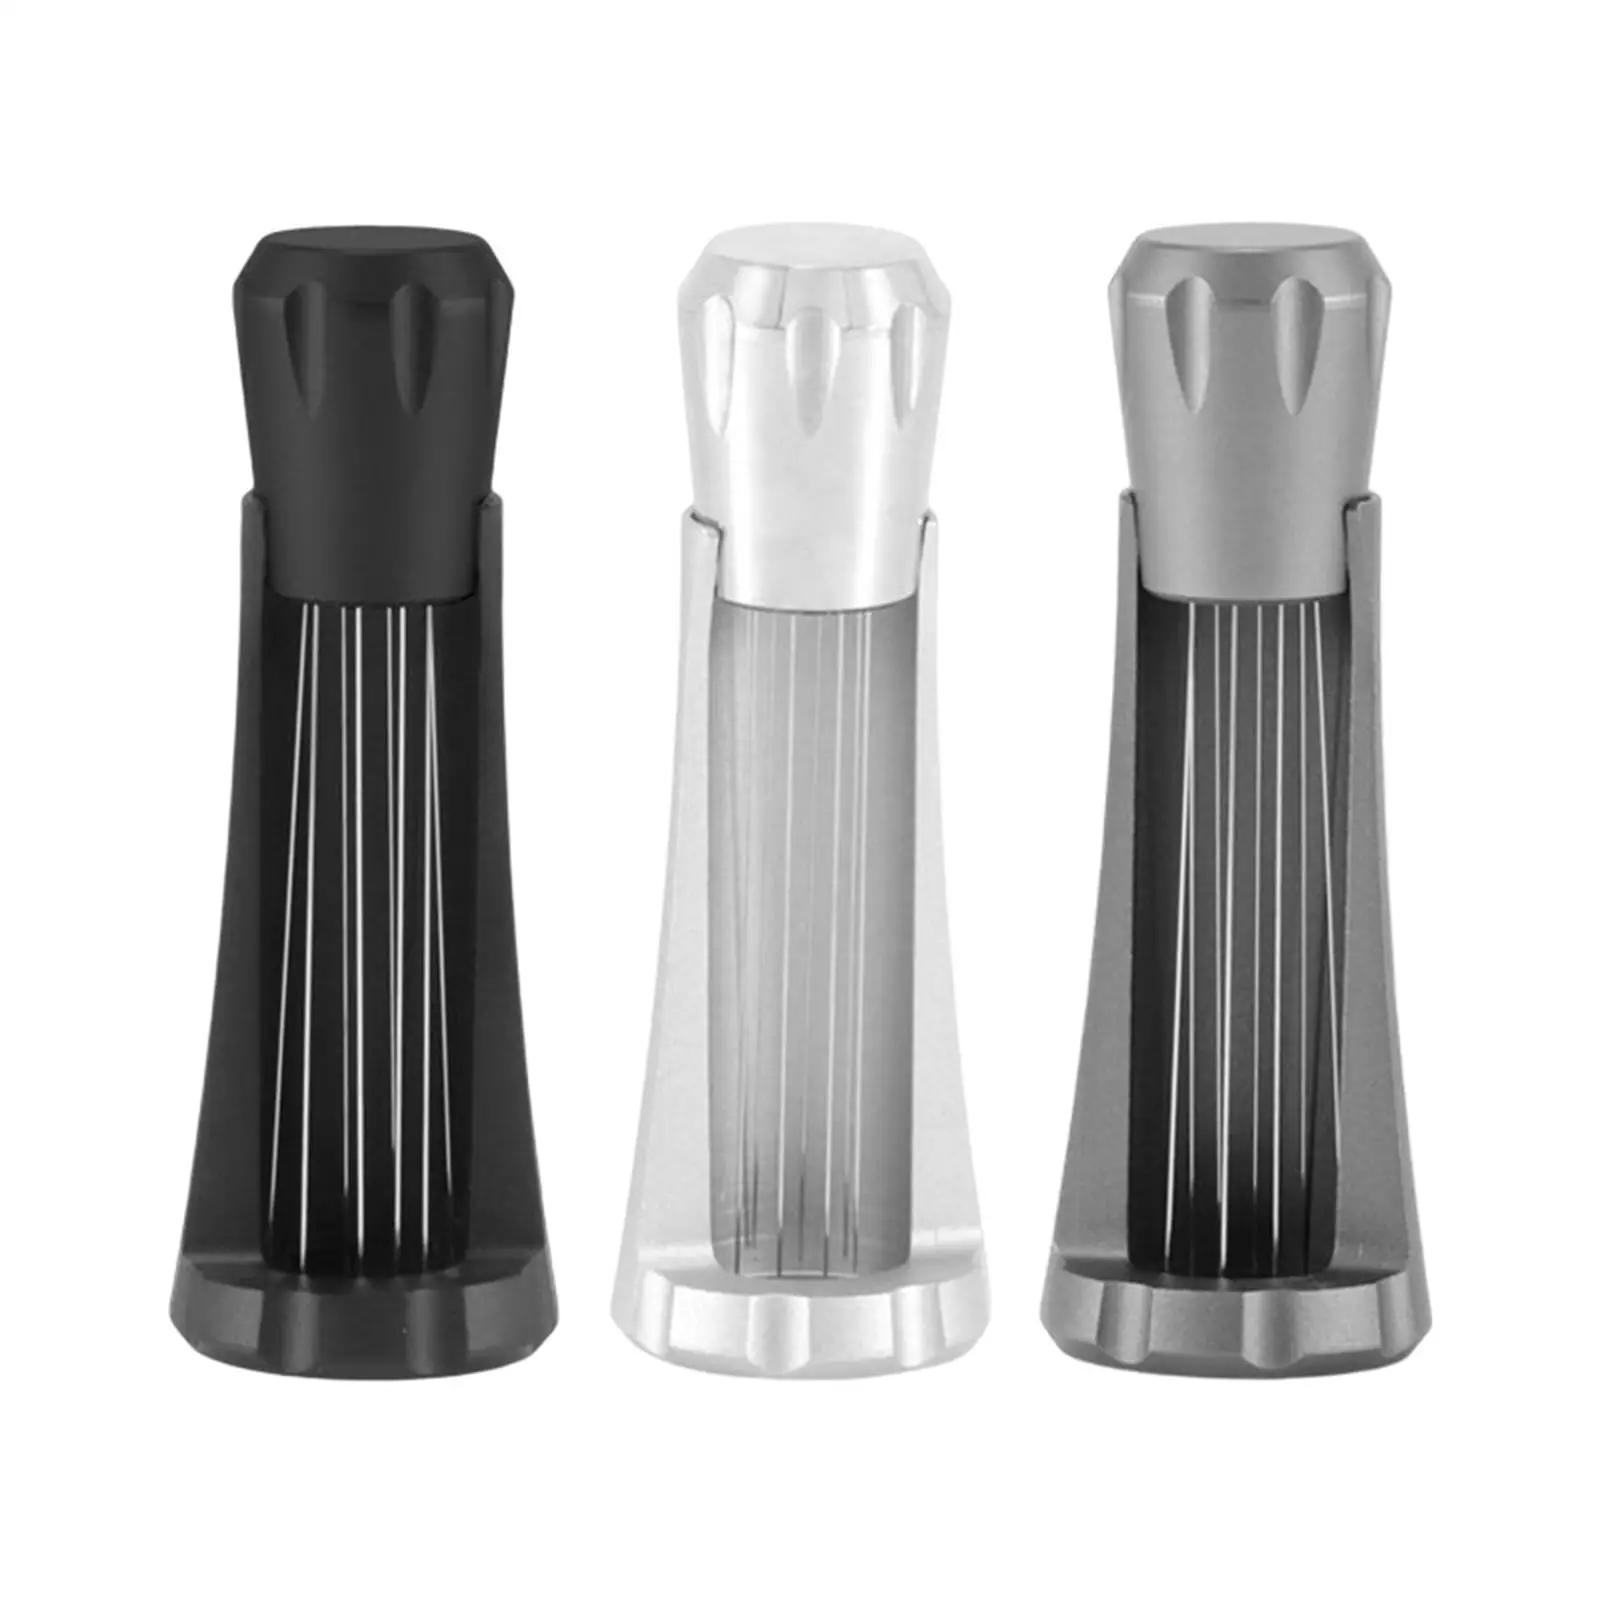 Coffee Distributor Comfortable Grip with Base Durable Coffee Leveler Coffee Tamper Tool for Home bar Kitchen Accessory